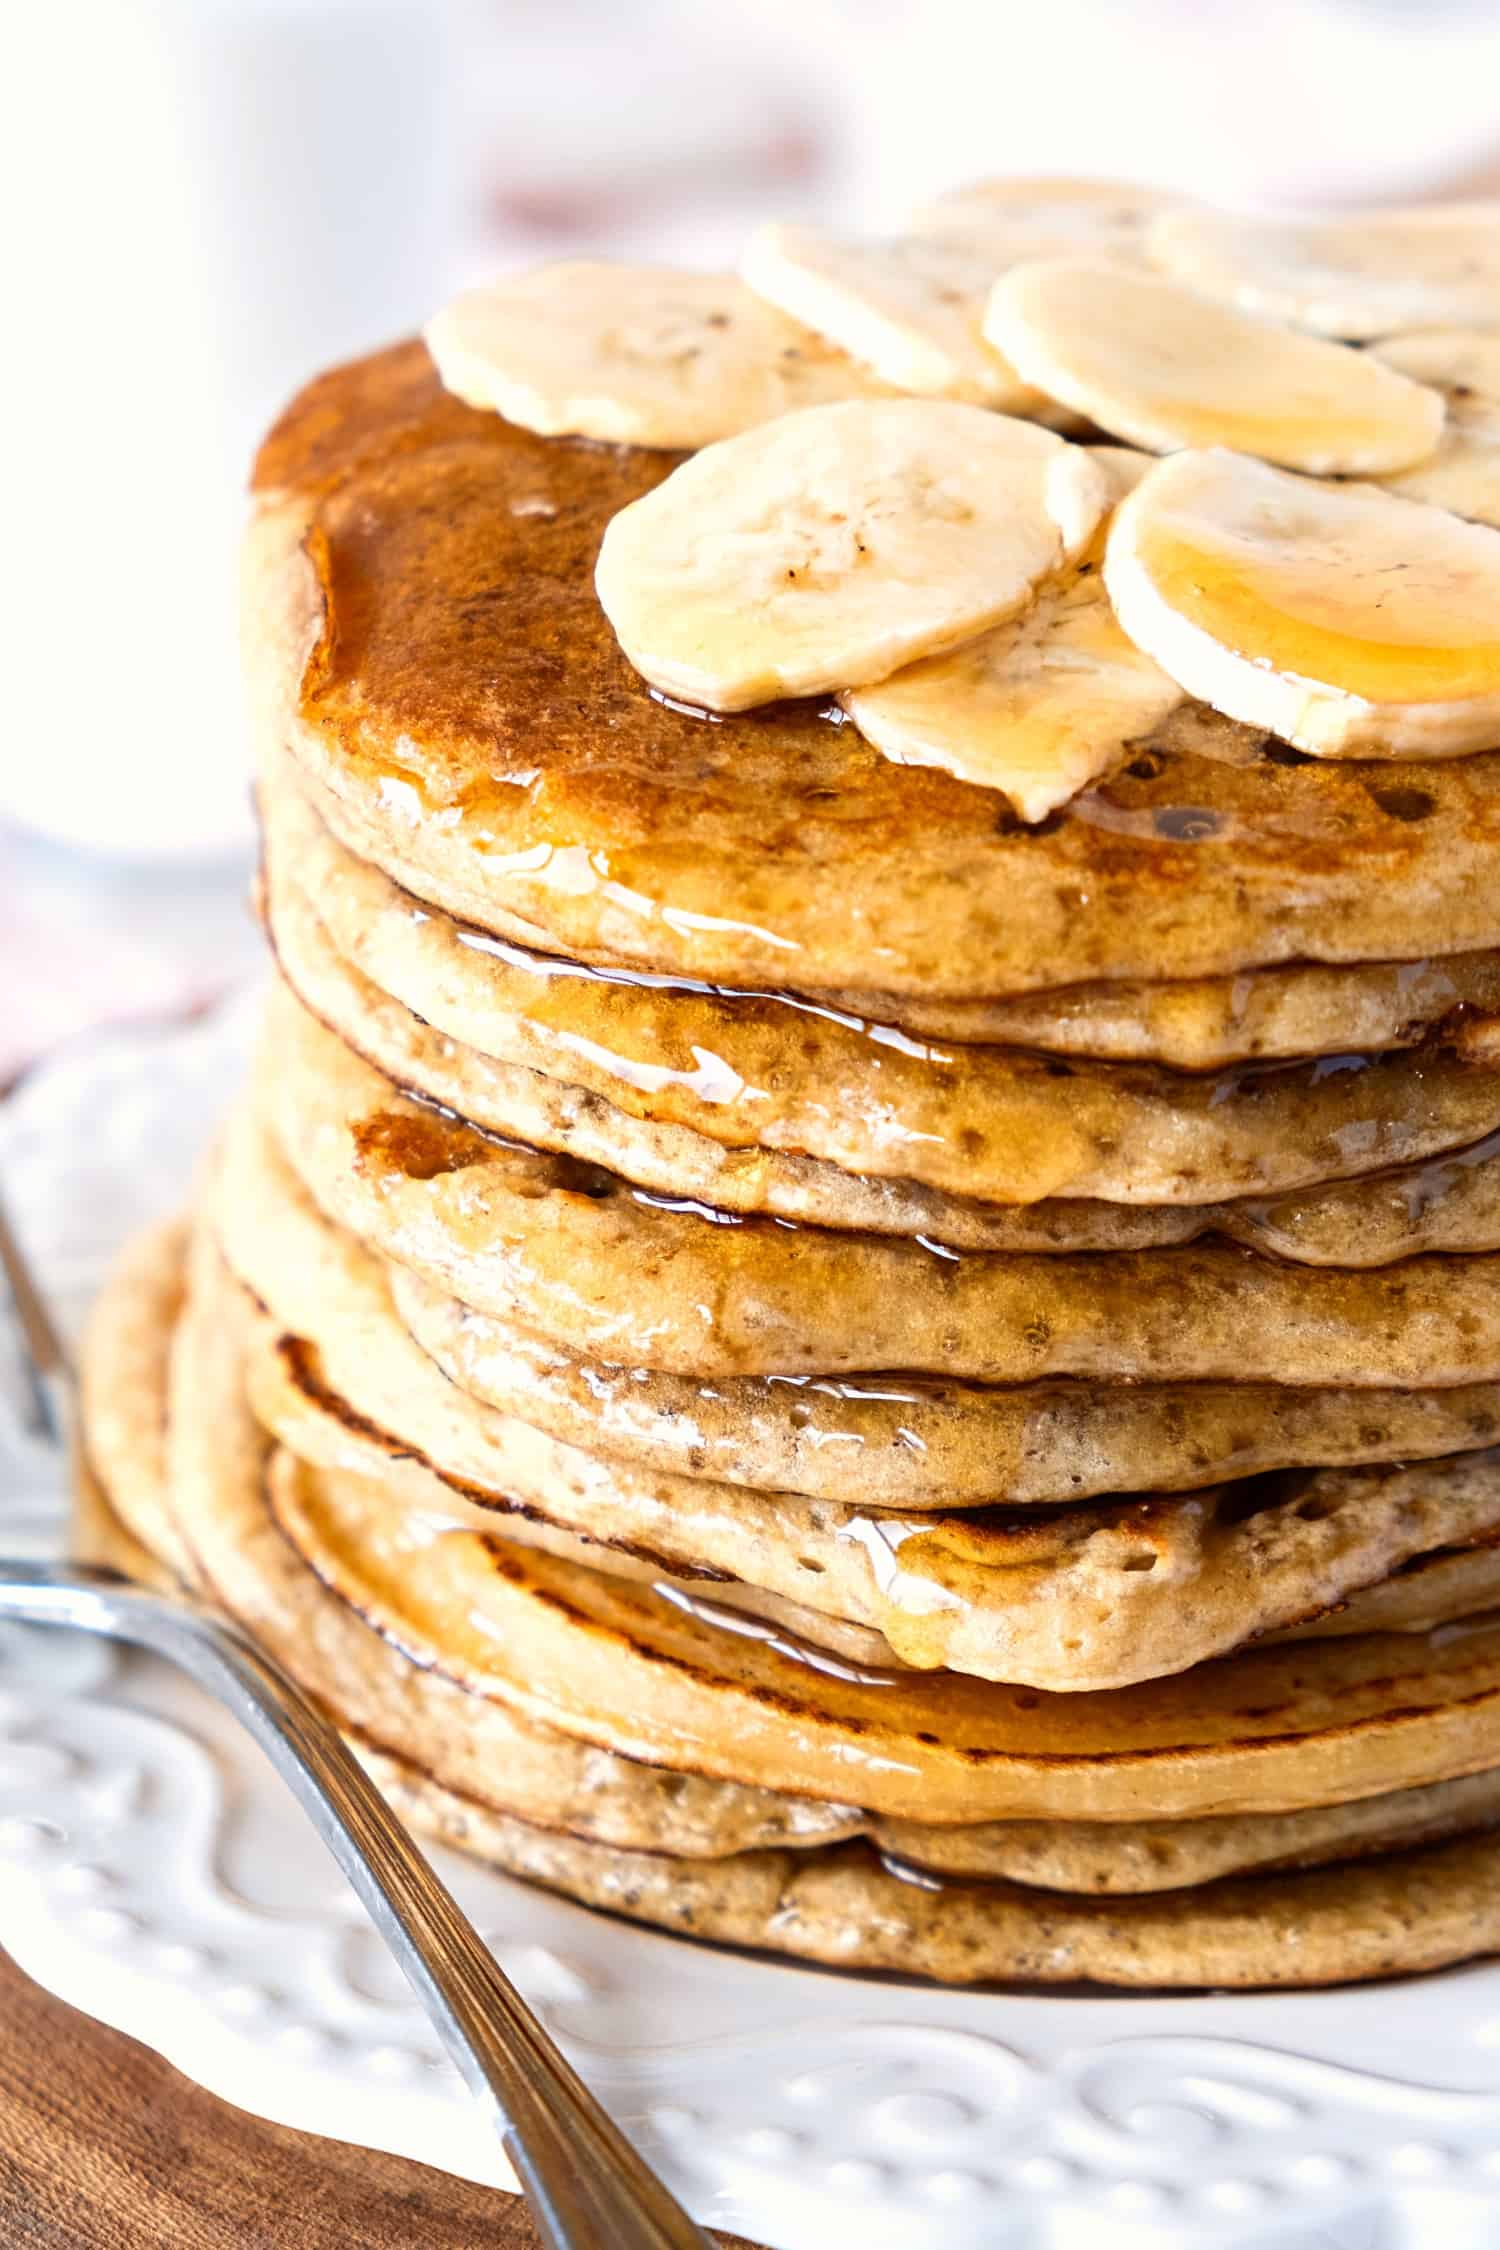 A stack of gluten-free banana pancakes topped with banana slices and maple syrup.